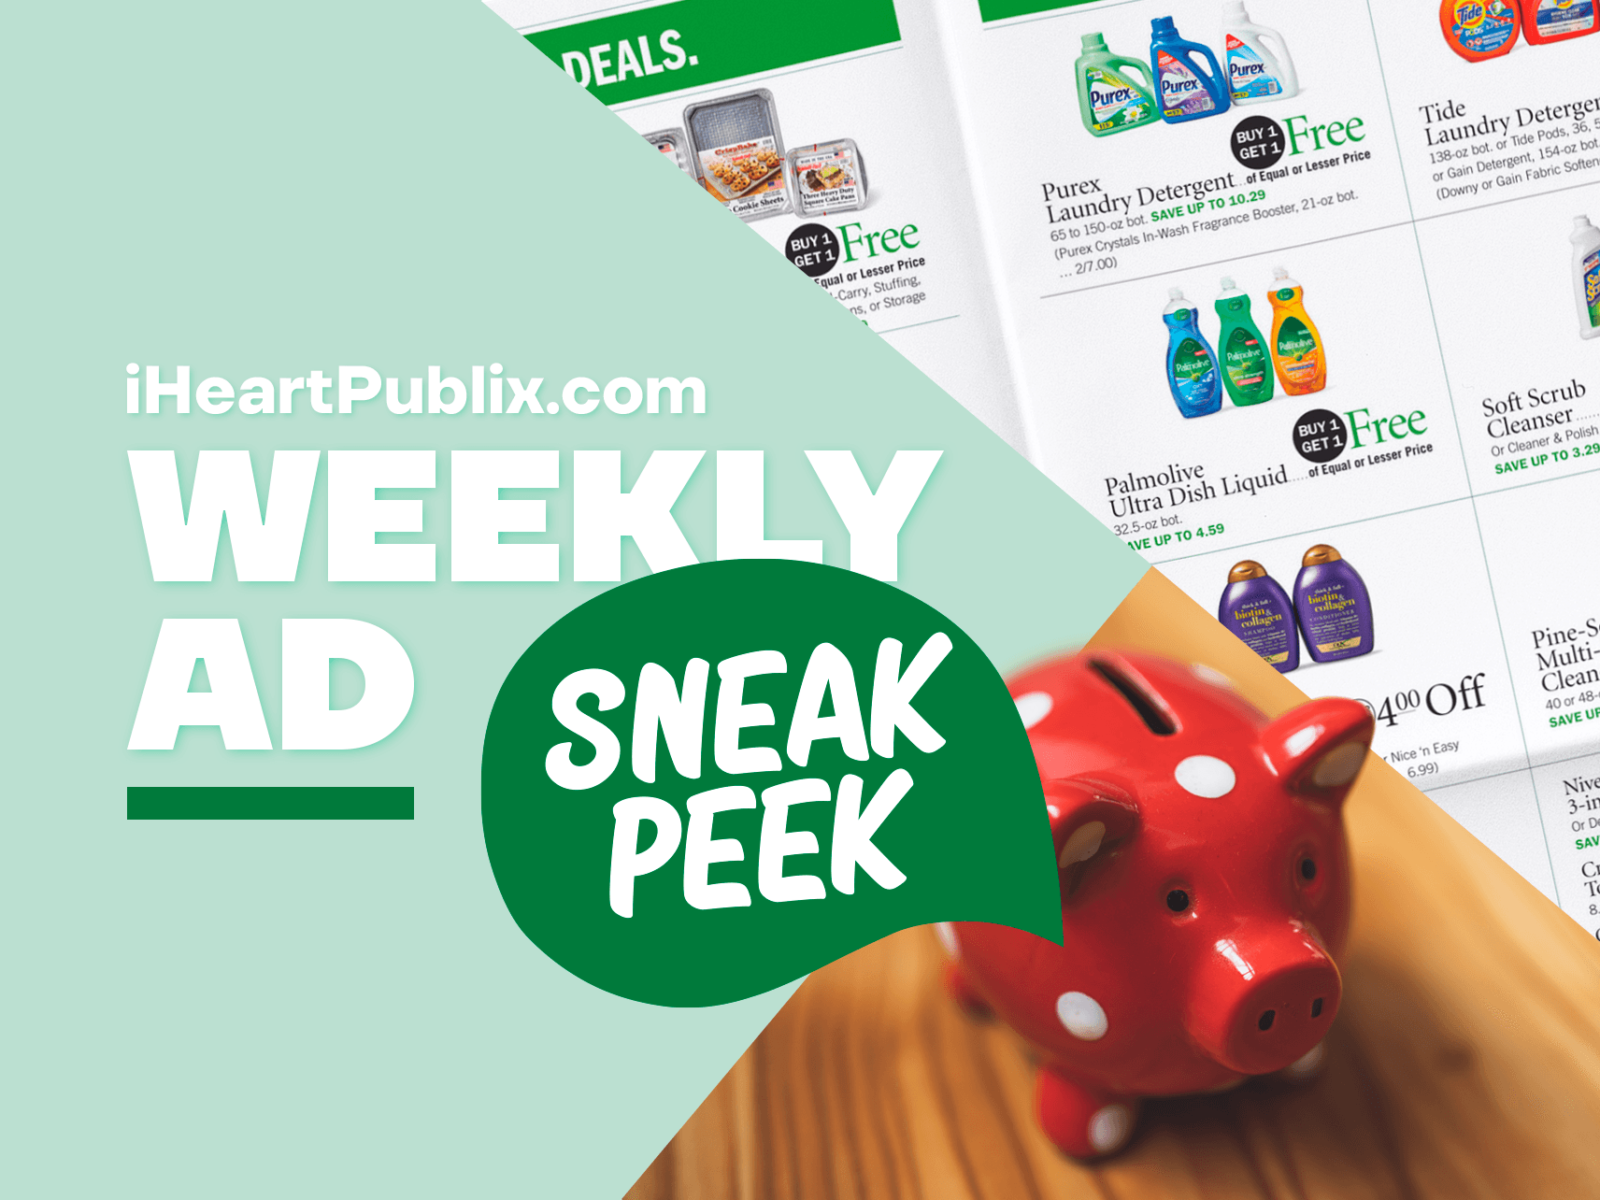 Publix Ad & Coupons Week Of 7/20 to 7/26 (7/19 to 7/25 For Some)